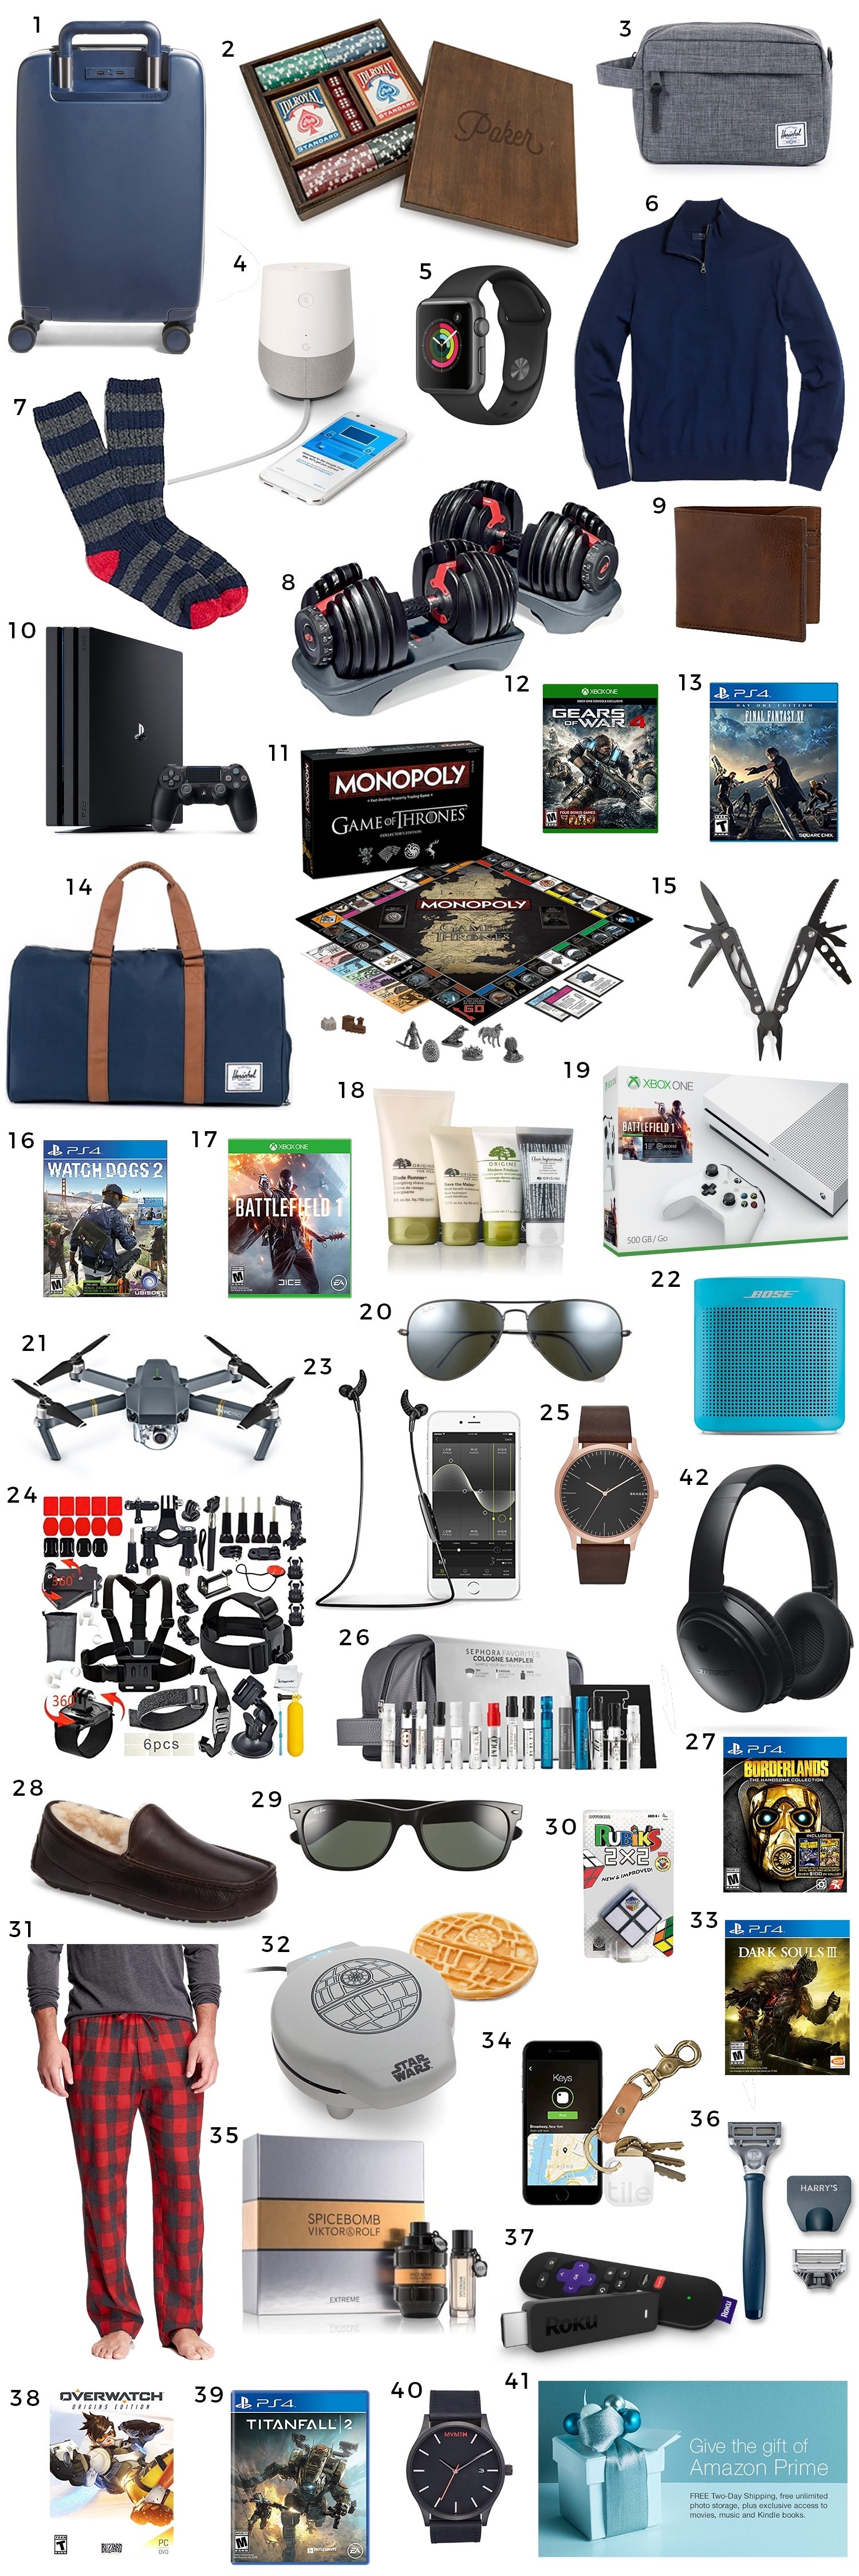 10 Amazing Christmas Gifts For Men Ideas the best christmas gift ideas for men ashley brooke nicholas 9 2022